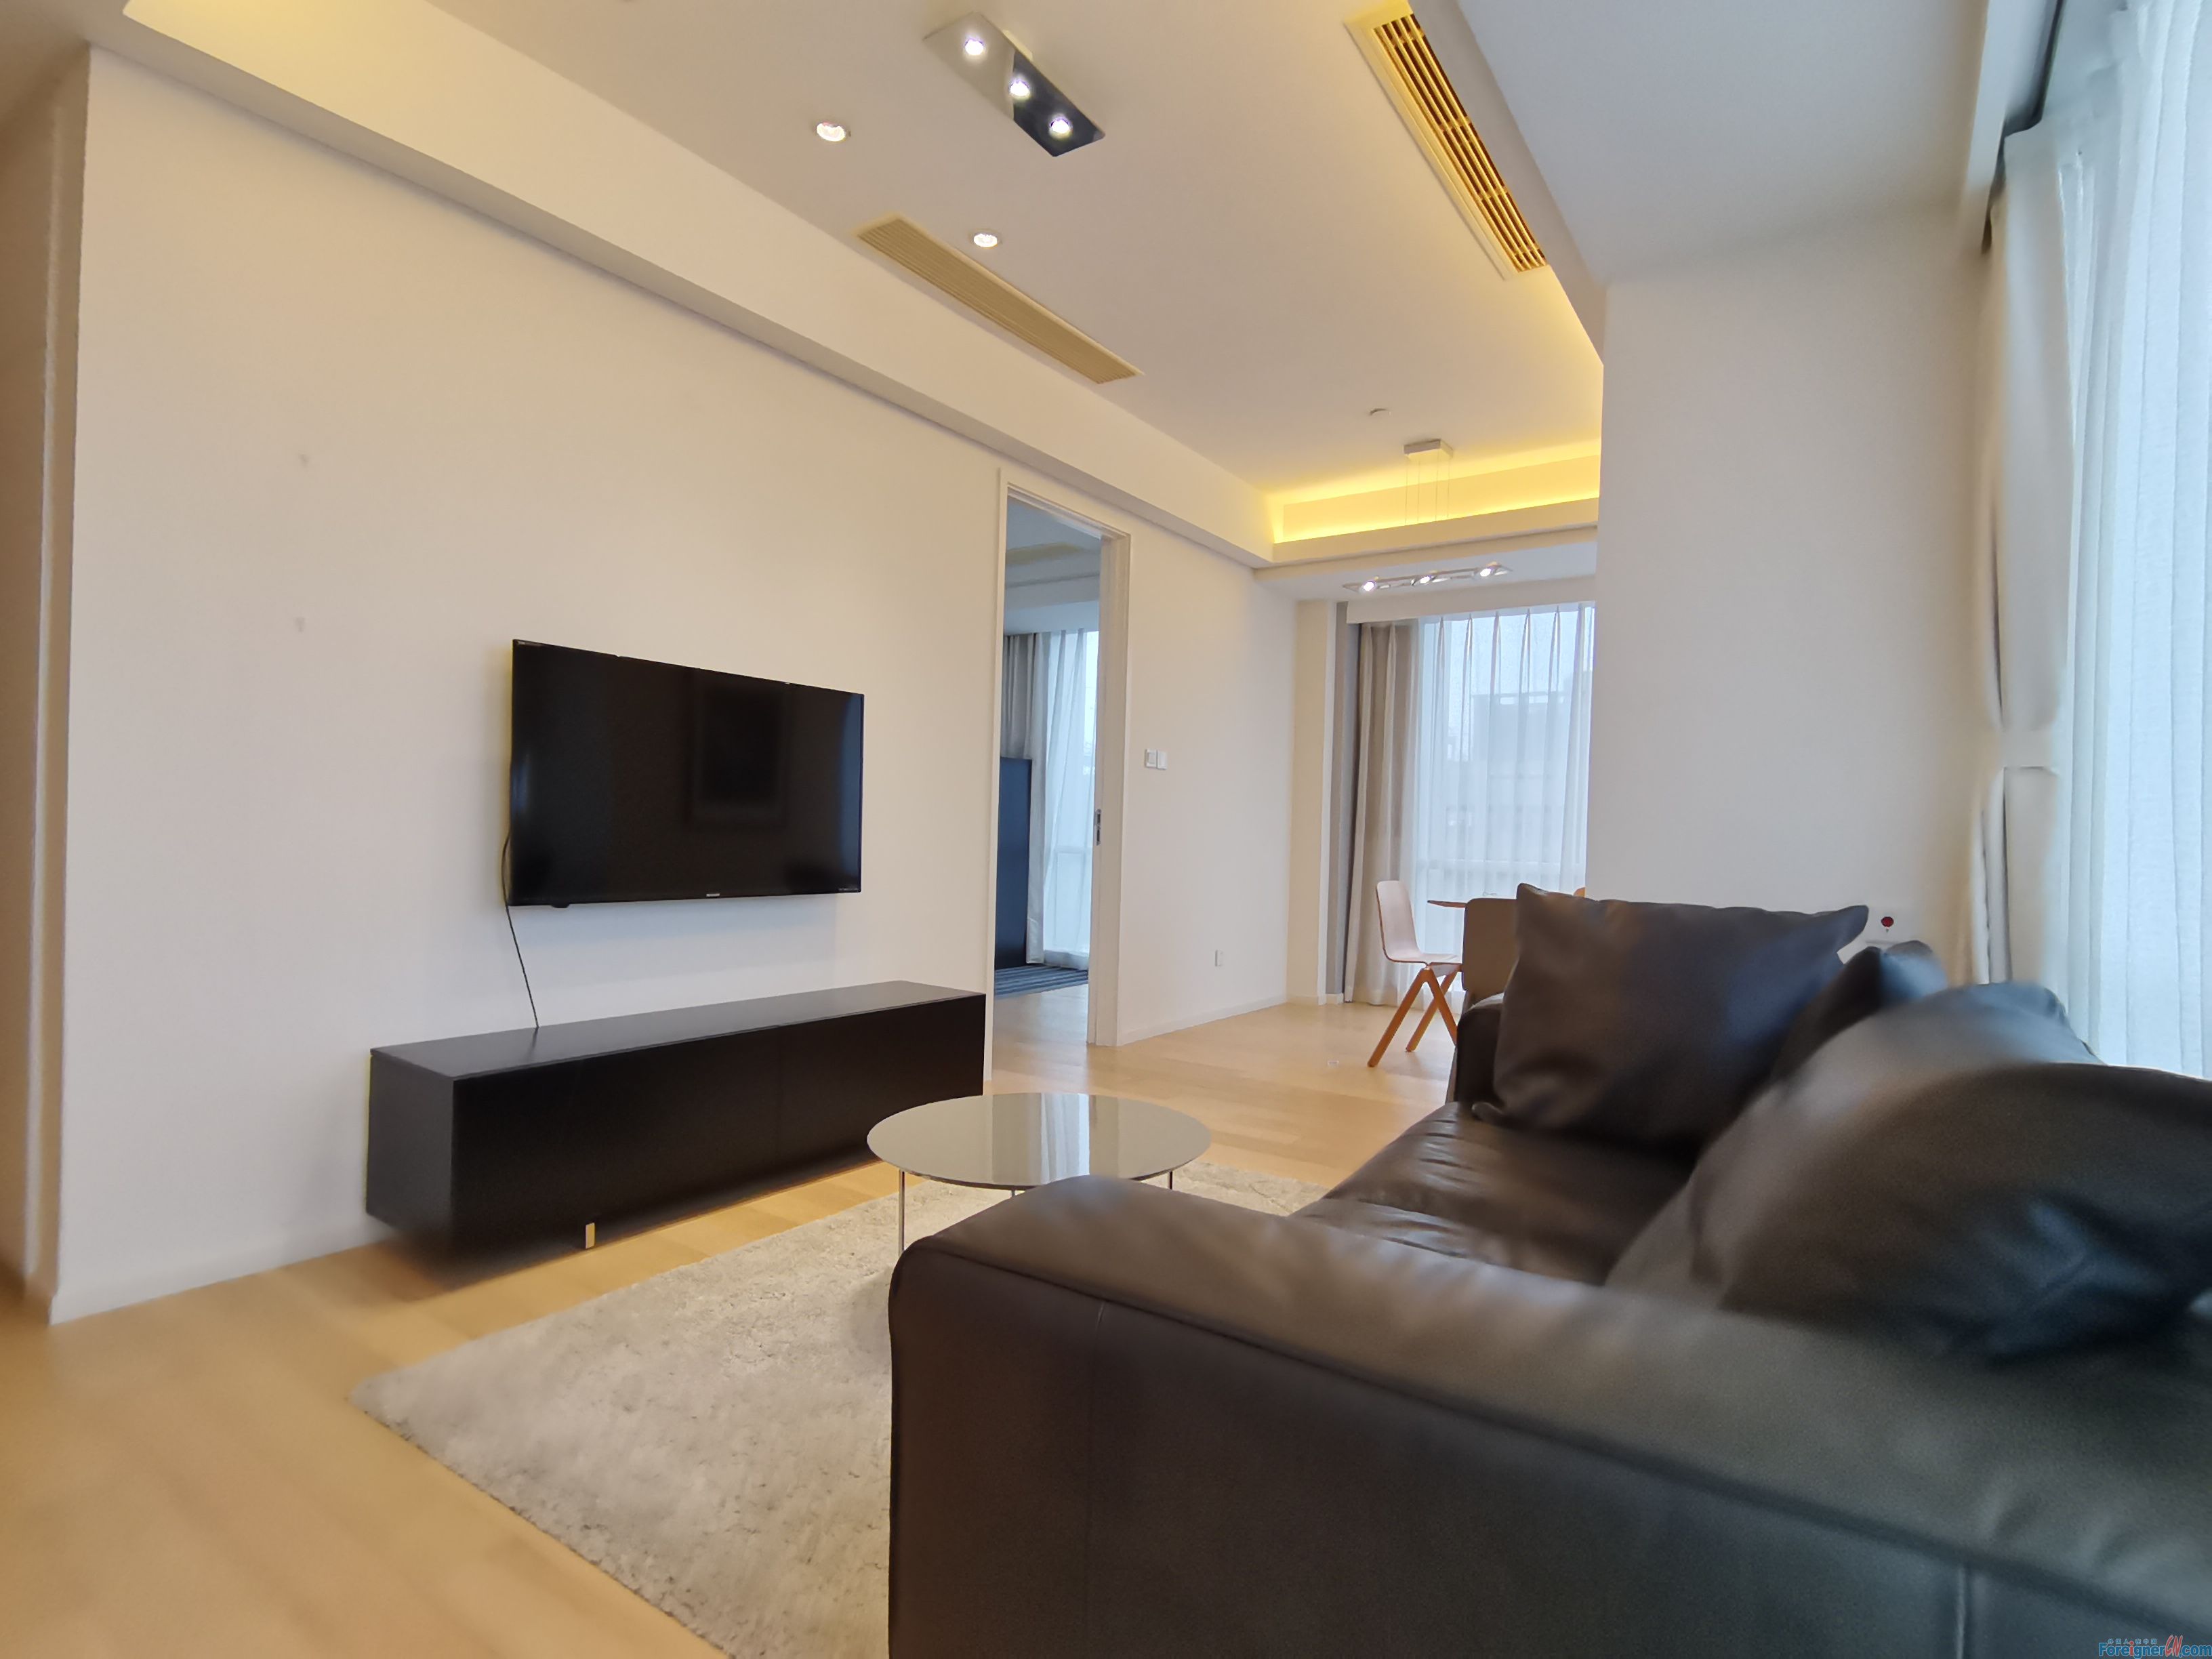 Terrific !!! The Summit Apartment rent in Suzhou/2 brd and 1 bath/Clean; Cosy and Nice Management department/Close to Moon Bay and TImes Square/SIP/